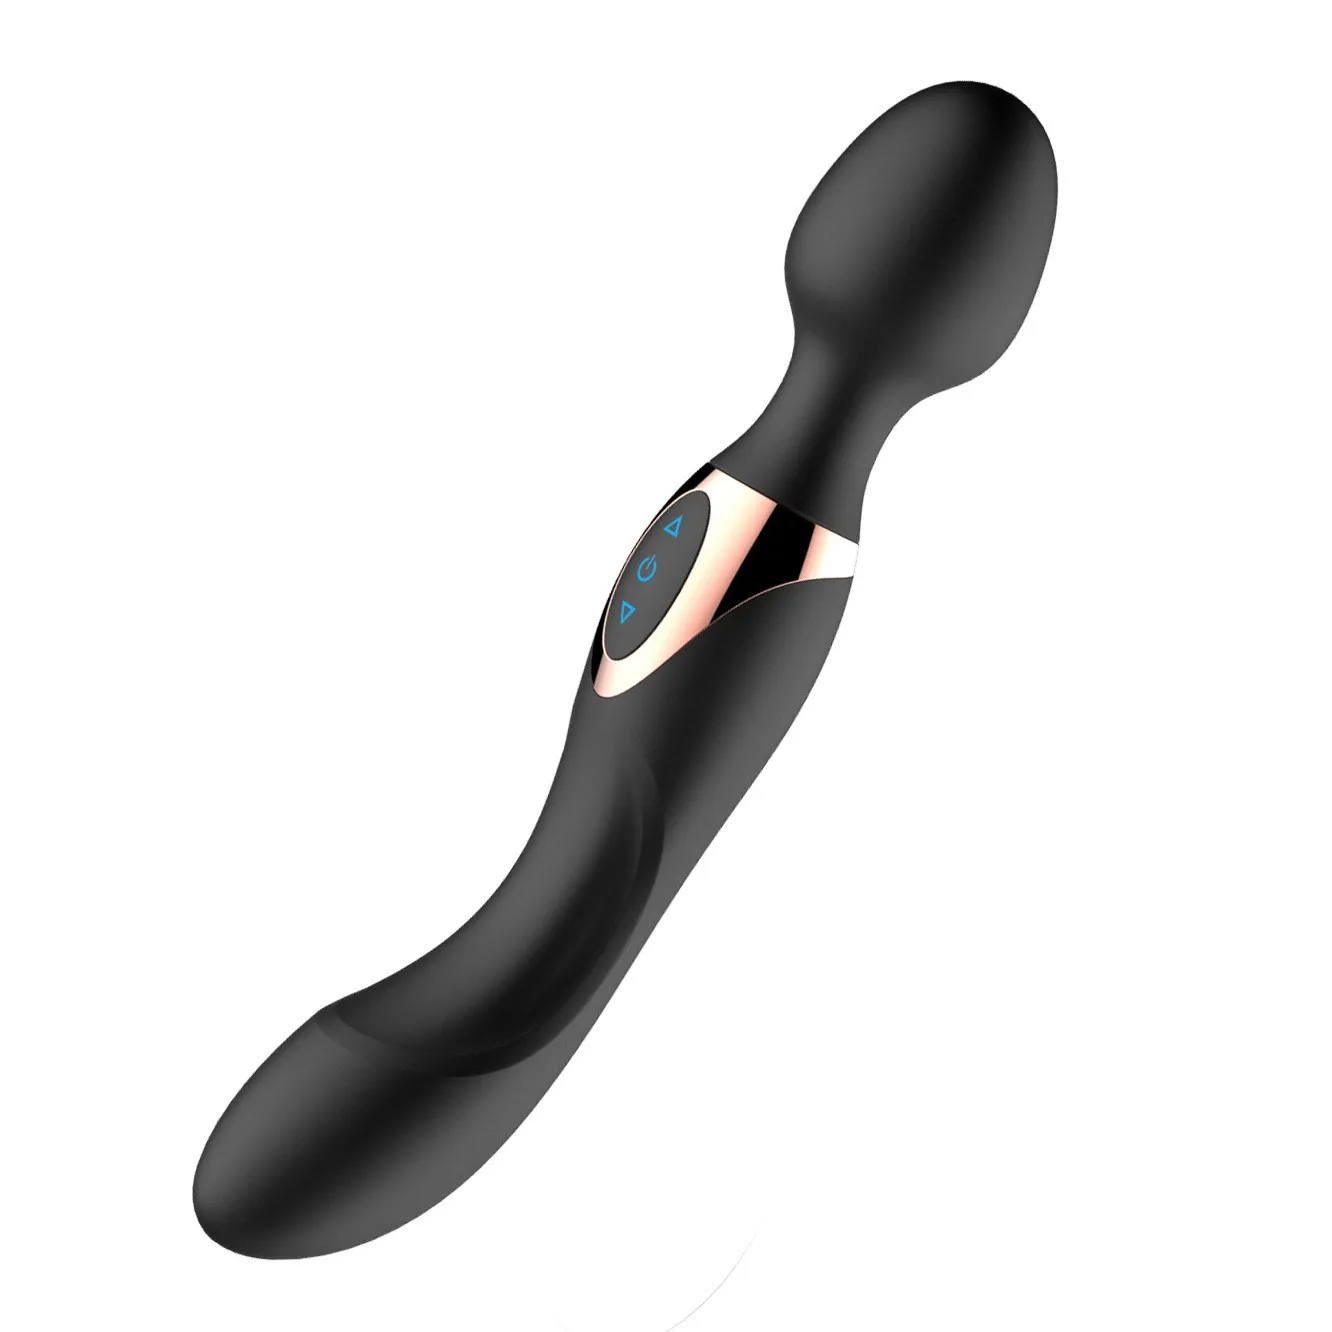 Double Motors Multi Speed 10 Frequence Vibration Vibrator Waterproof Rechargeable Sex Toys for Women Massage Wand for G Spot and Vagina Erotic Toys for Adult,Black